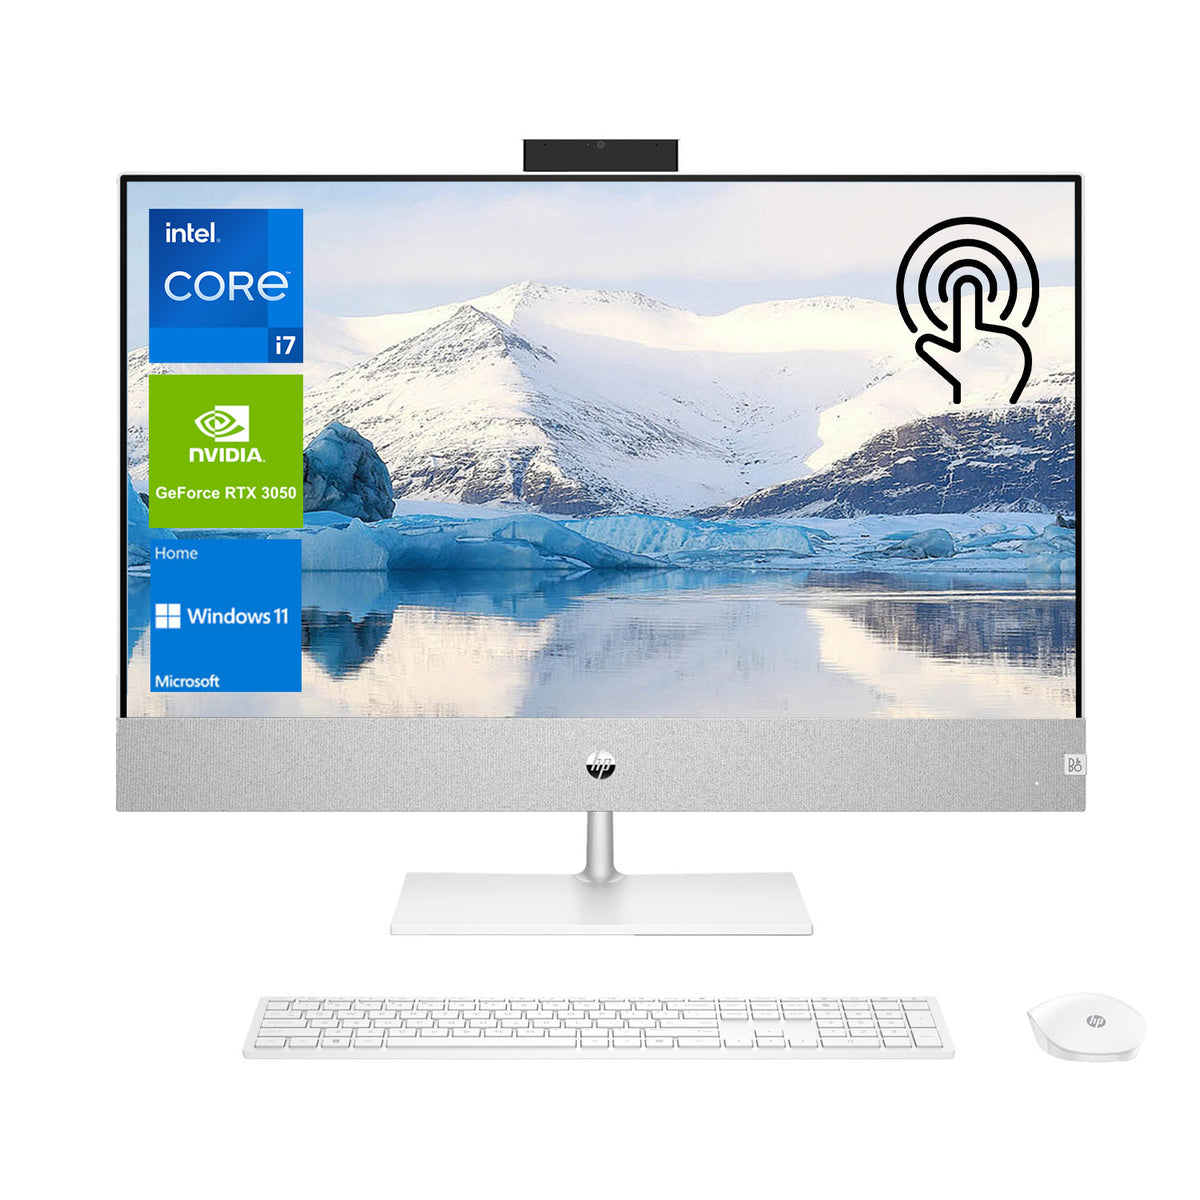 HP Pavilion All-in-One, 27" FHD 1920 * 1080 Touchscreen 60Hz, Intel Core i7-13700T, NVIDIA GeForce RTX 3050, 8GB DDR4 SODIMM RAM, 512GB PCIe M.2 SSD, Wi-Fi 6, Windows 11 Home, White